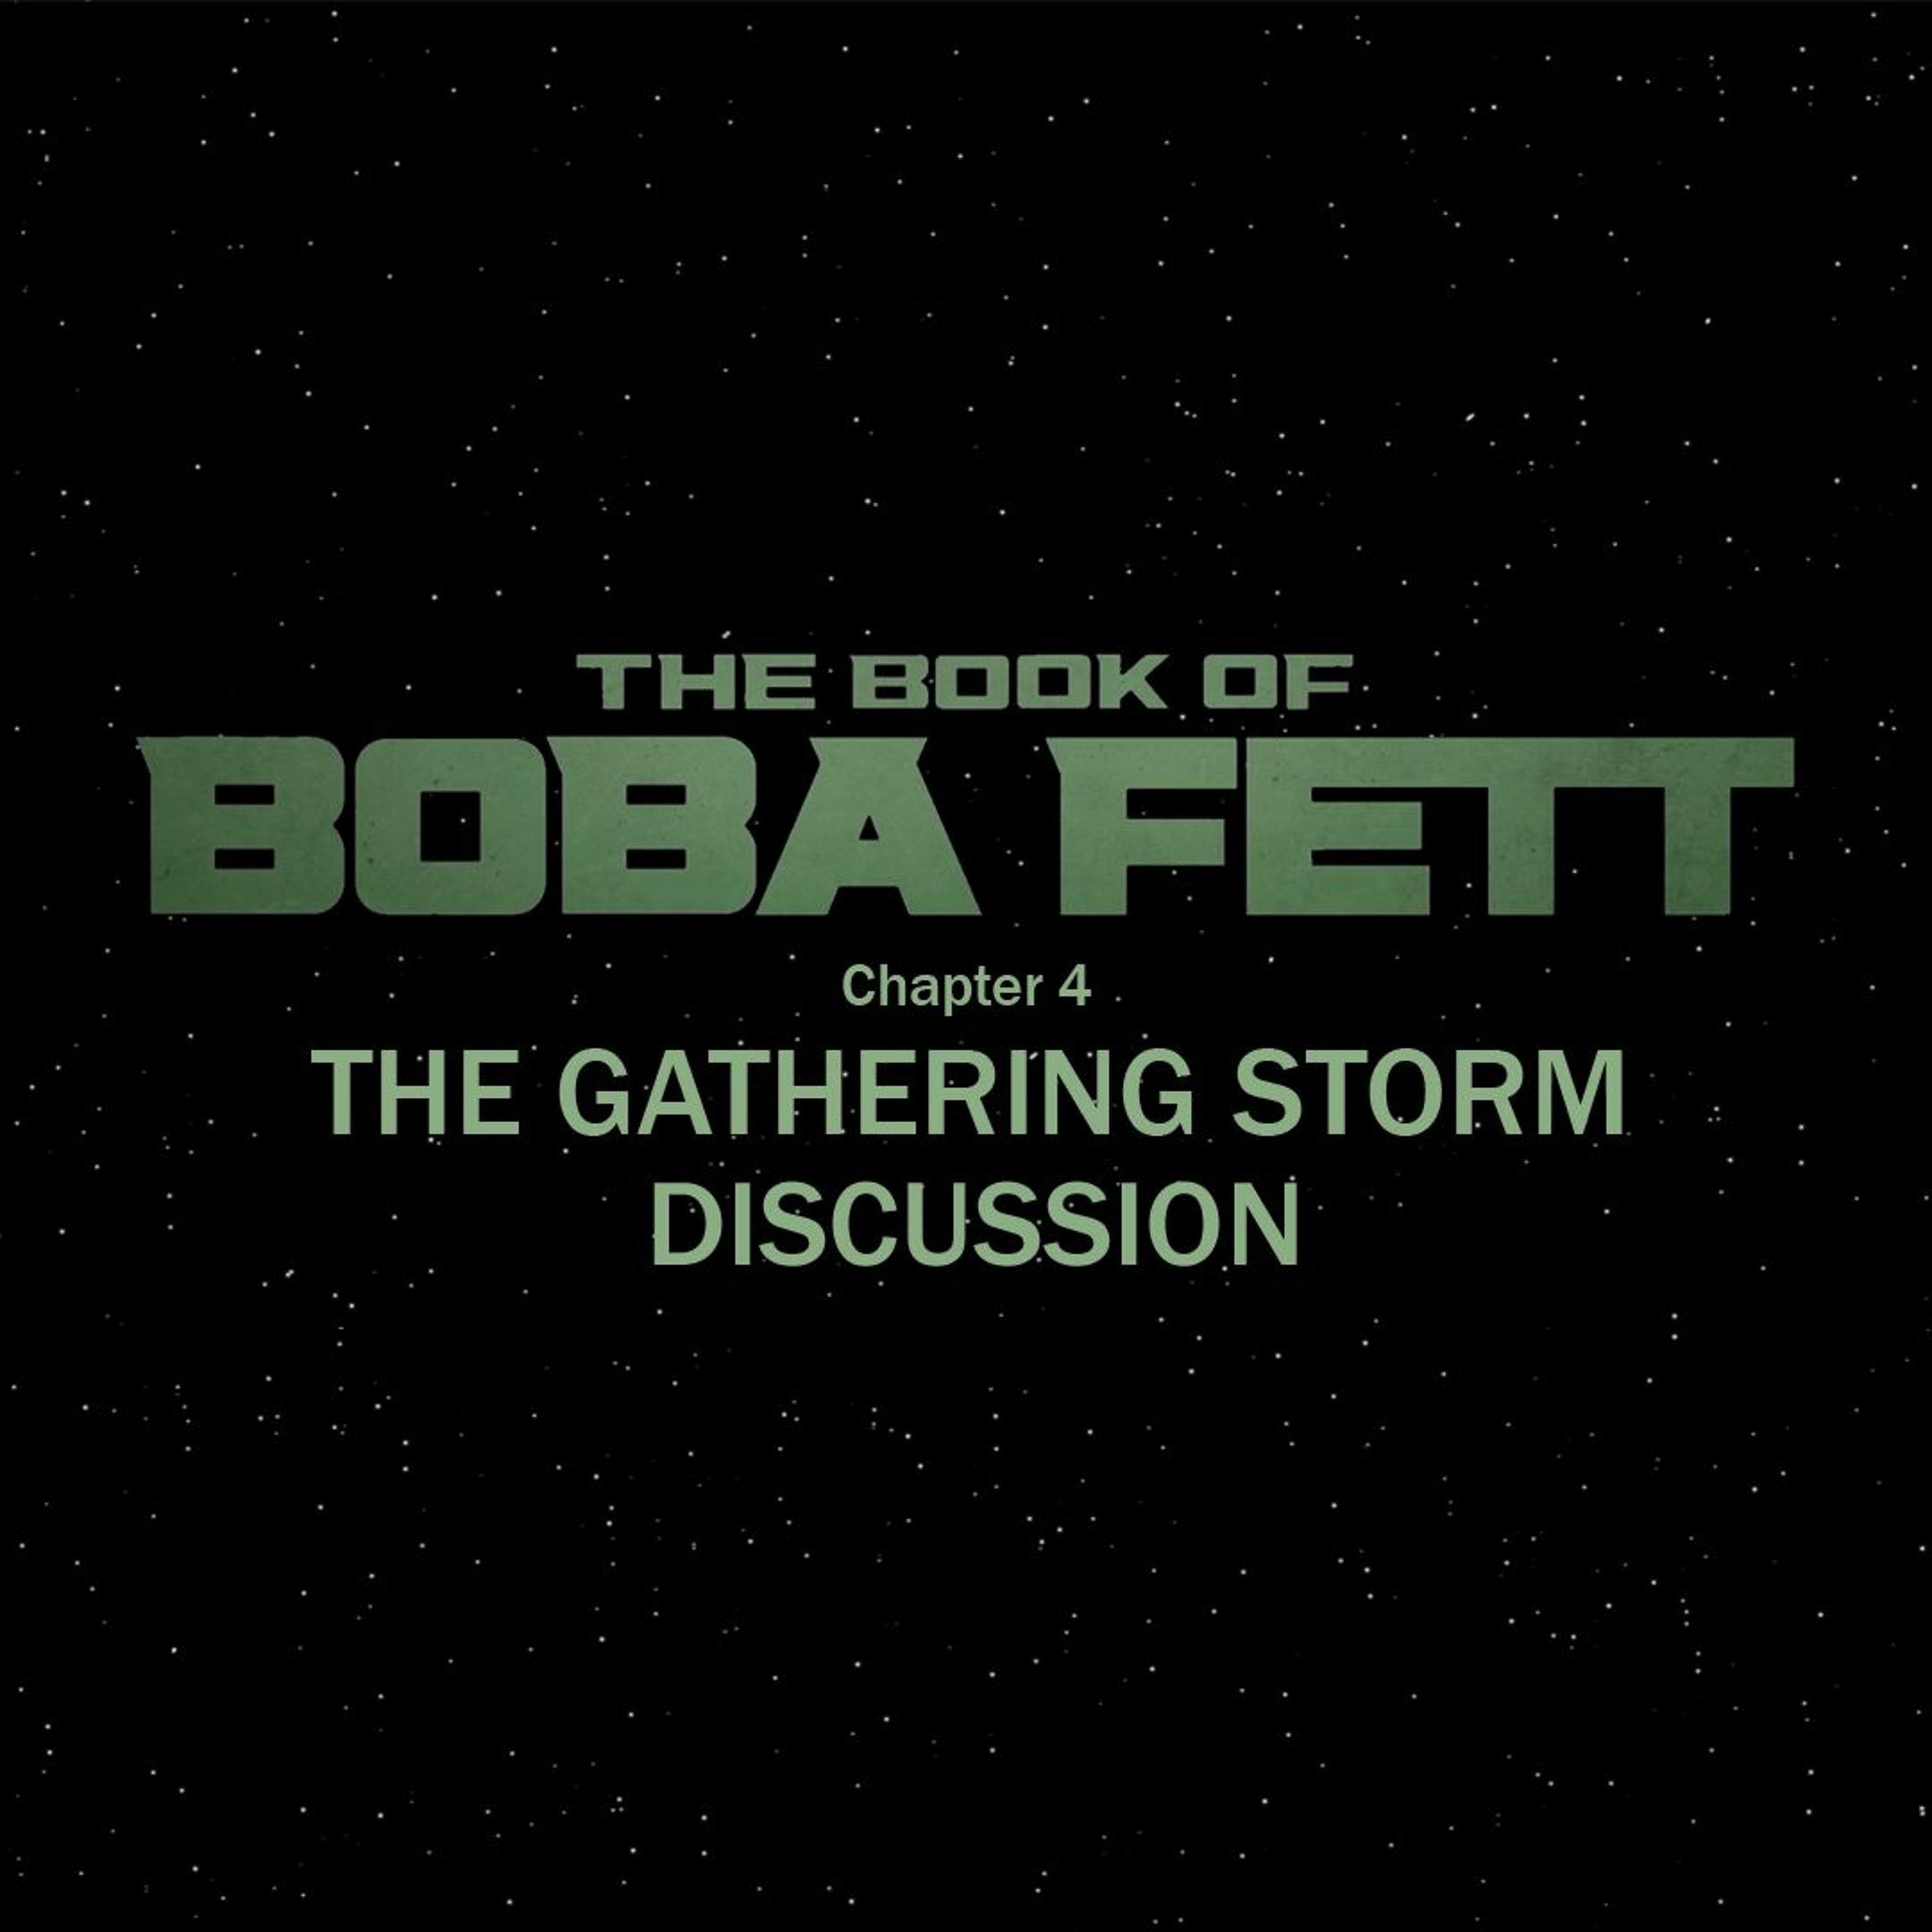 The Book of Boba Fett Chapter 4 - The Gathering Storm